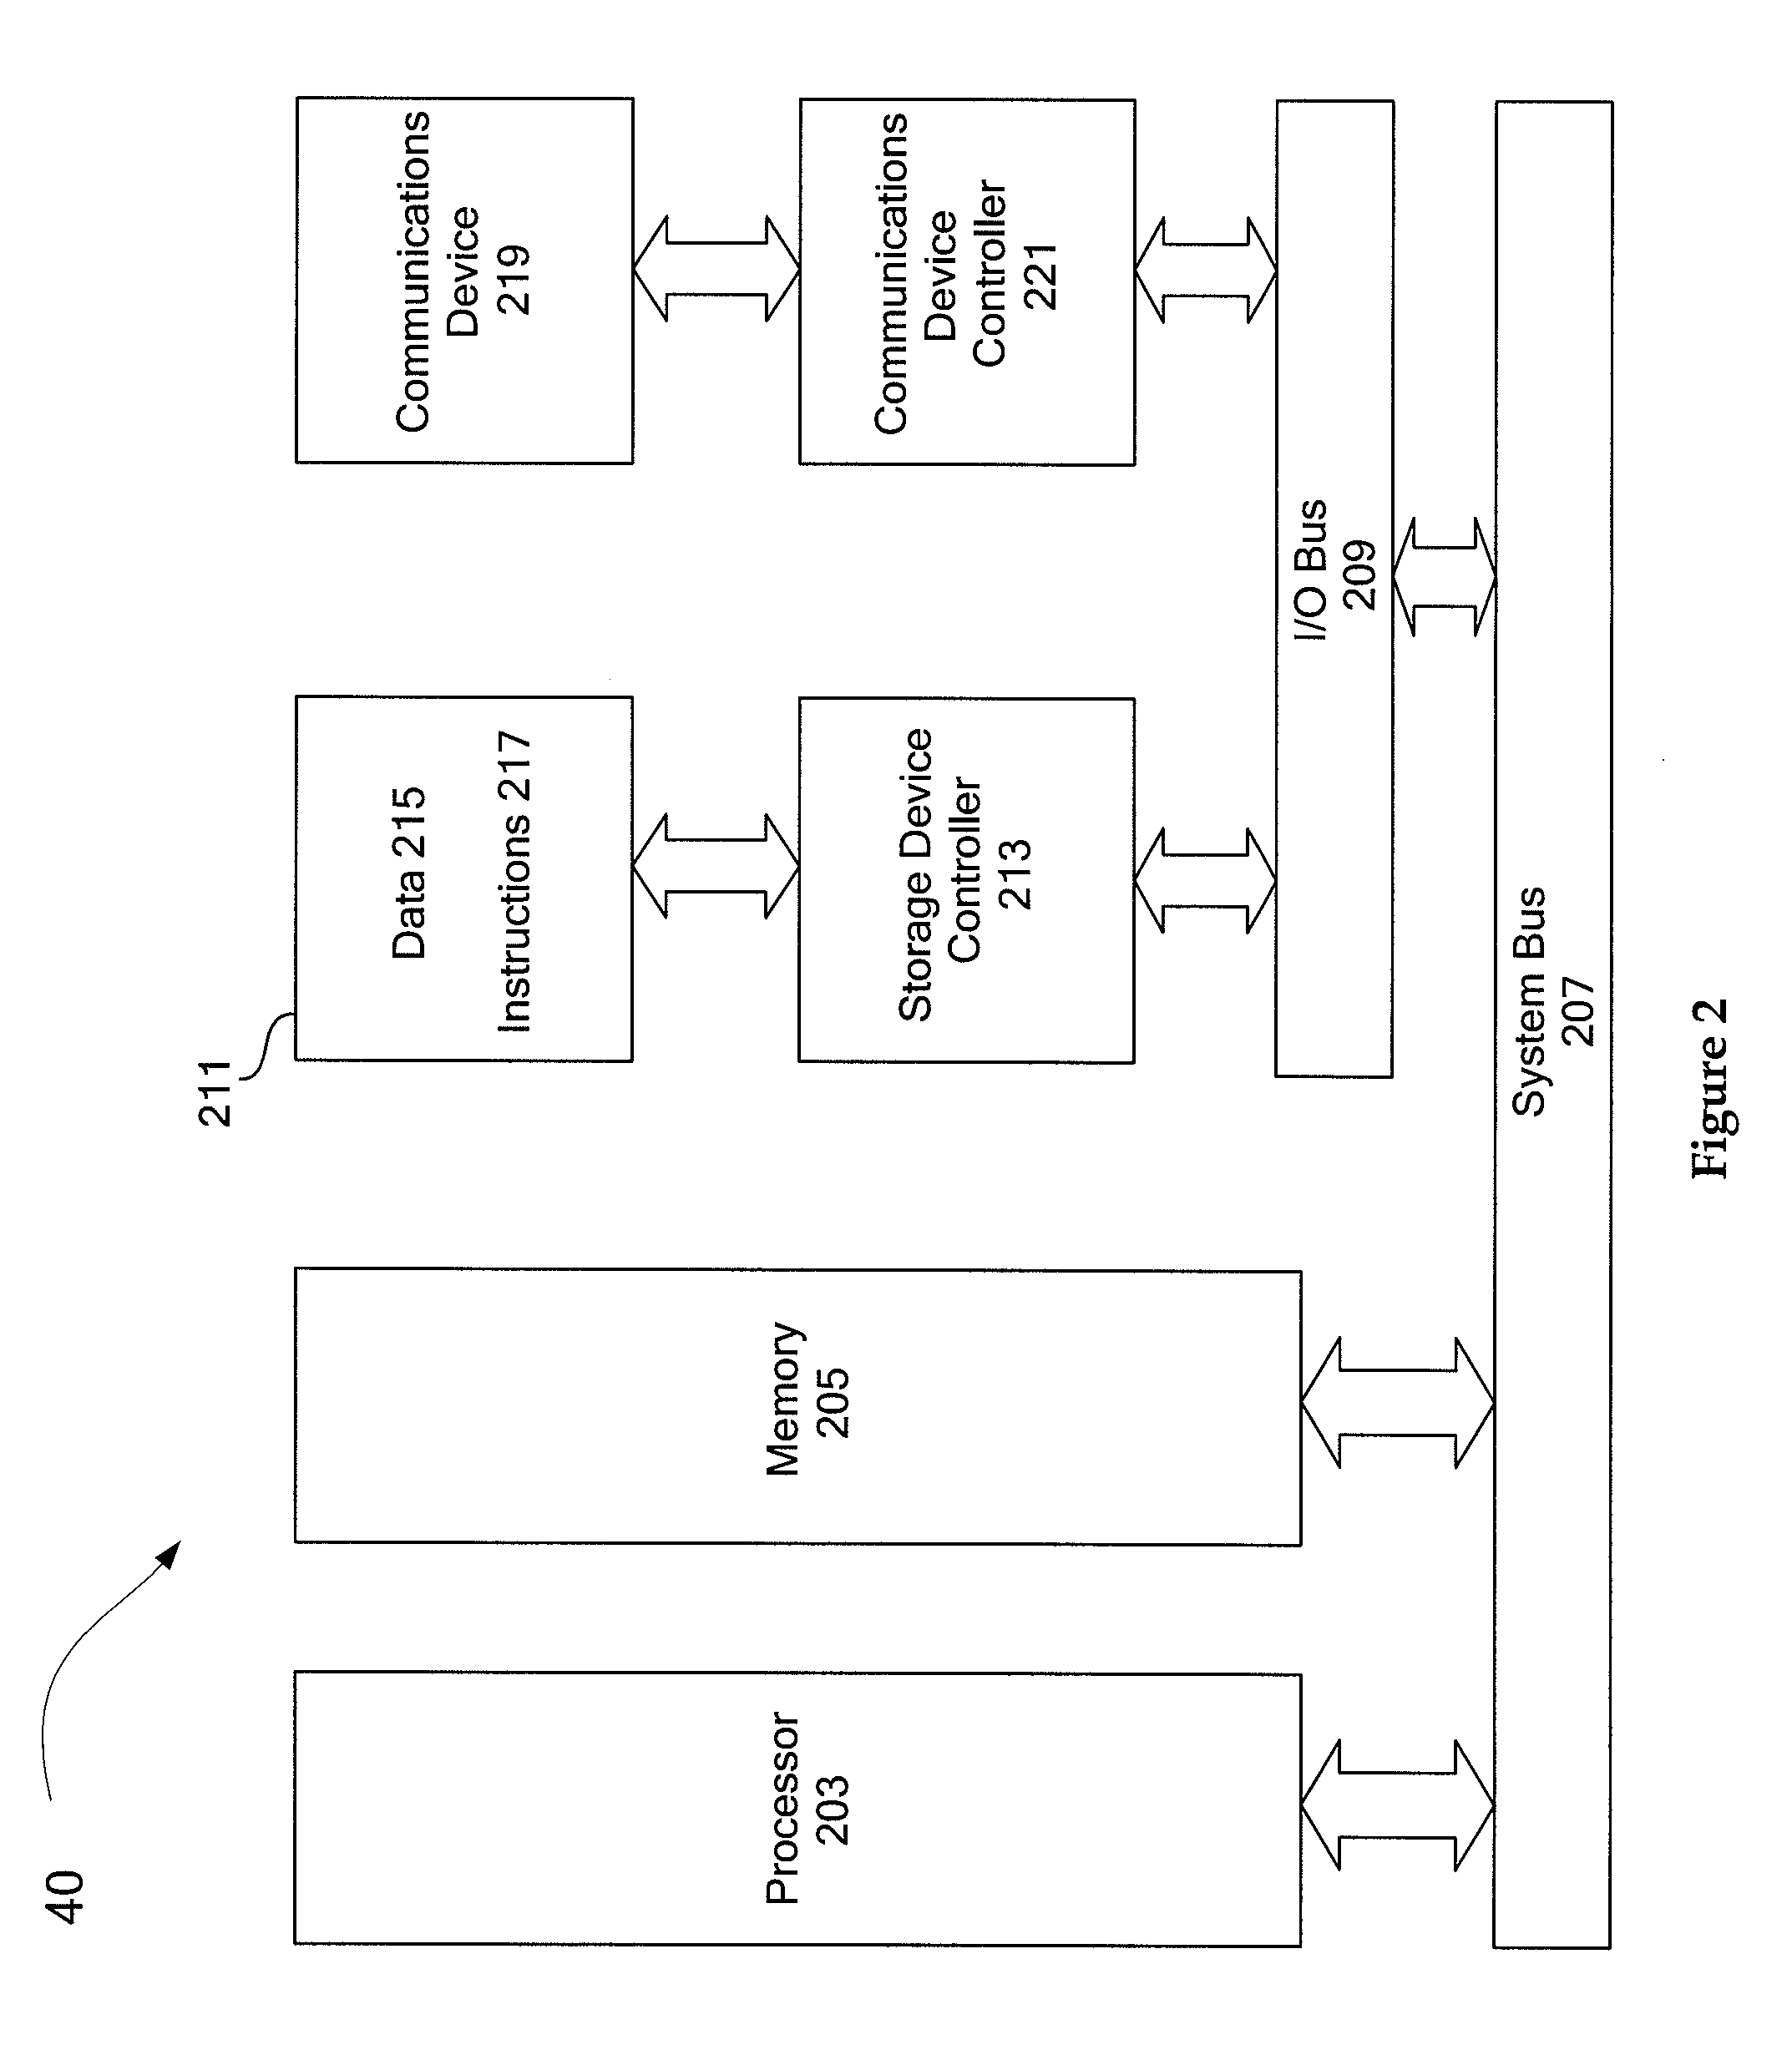 Generating a device independent interim connection space for spectral data